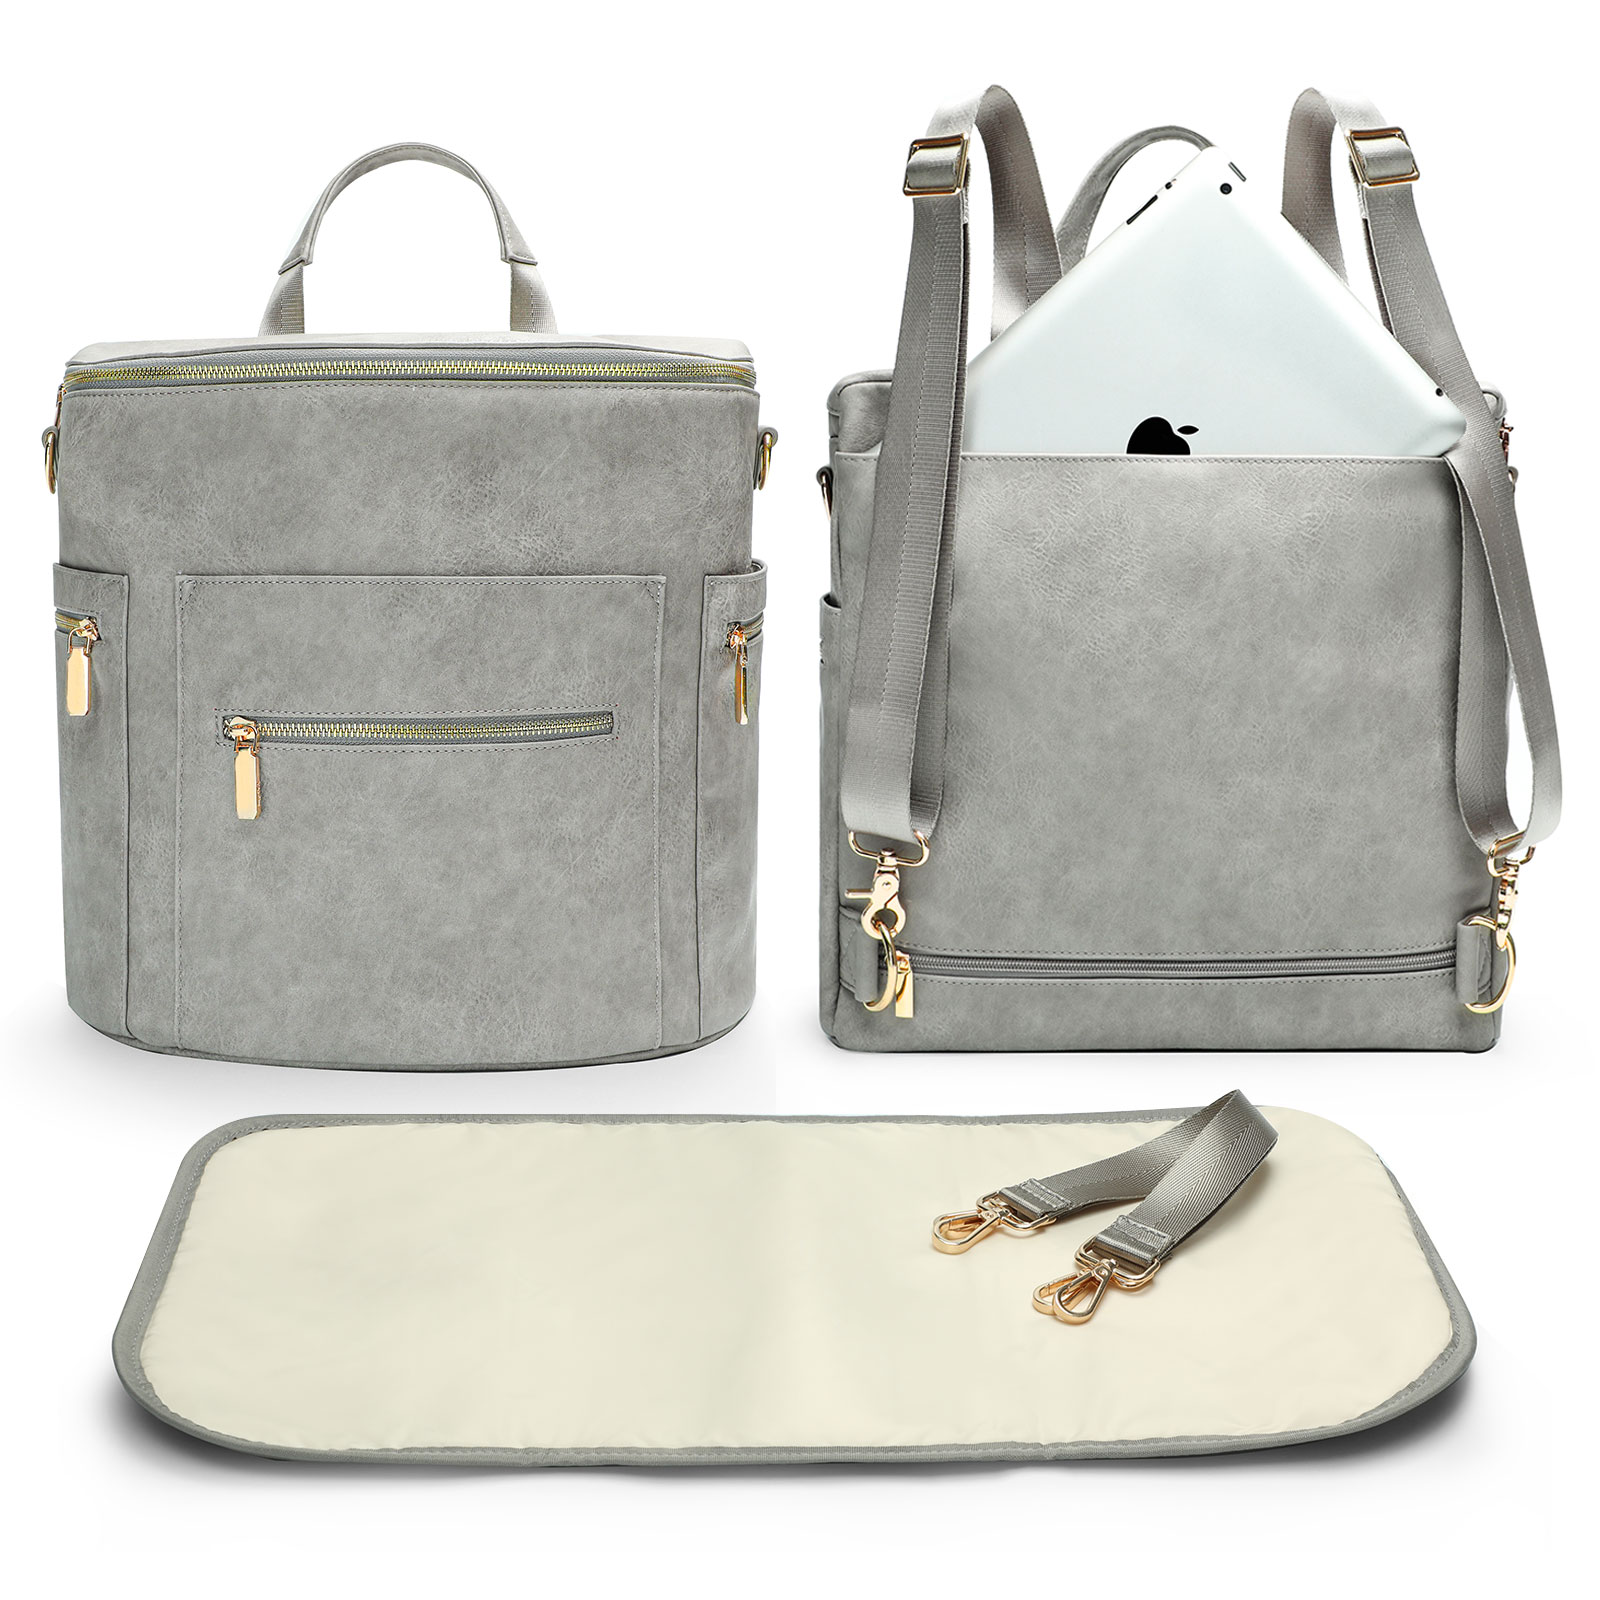 Grey Diaper Bag Backpack: Where Fashion Meets Function! – Momkindness